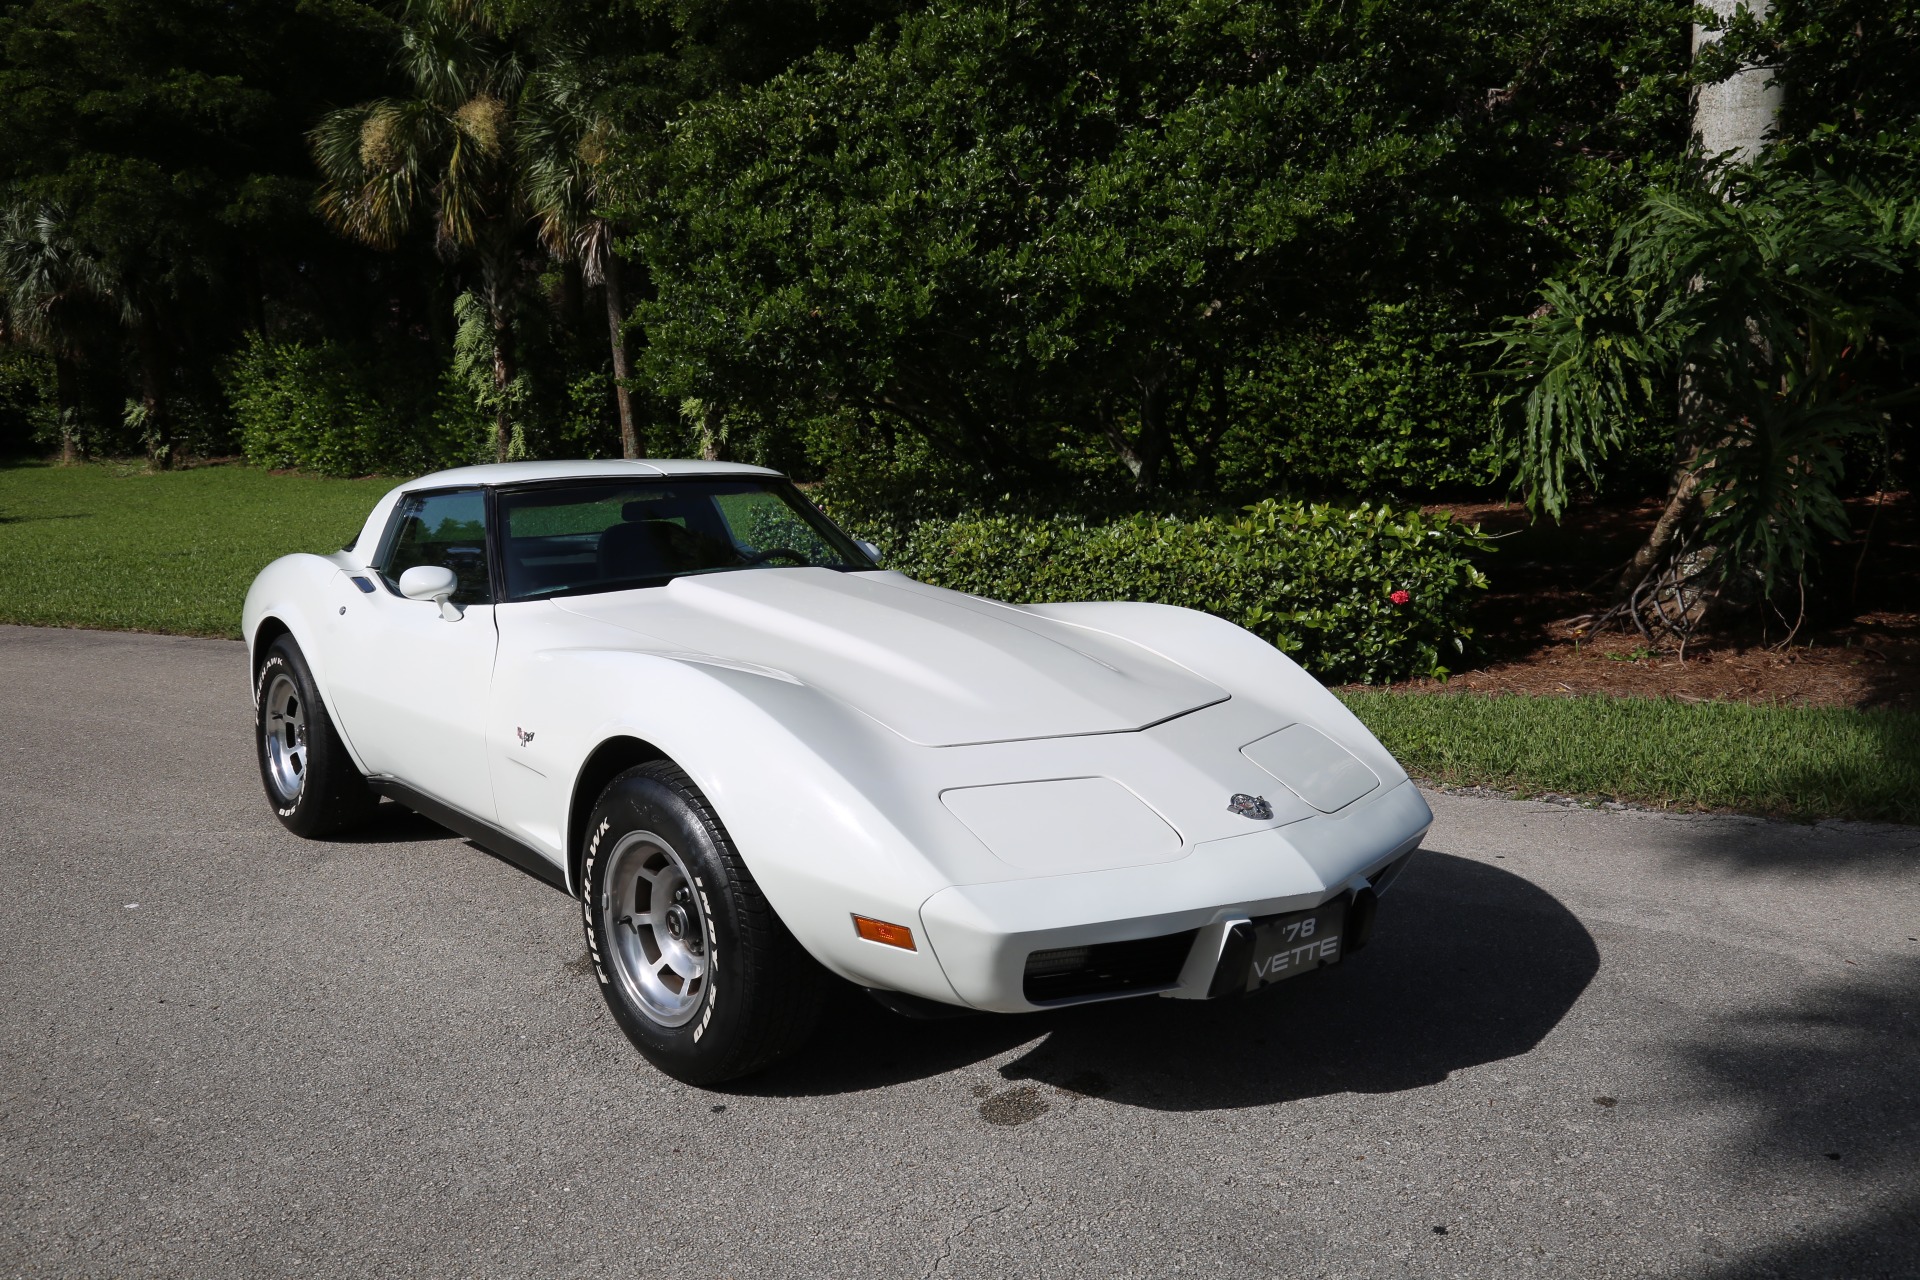 Used 1978 Chevrolet Corvette Anniversary Edition for sale $15,800 at Muscle Cars for Sale Inc. in Fort Myers FL 33912 7